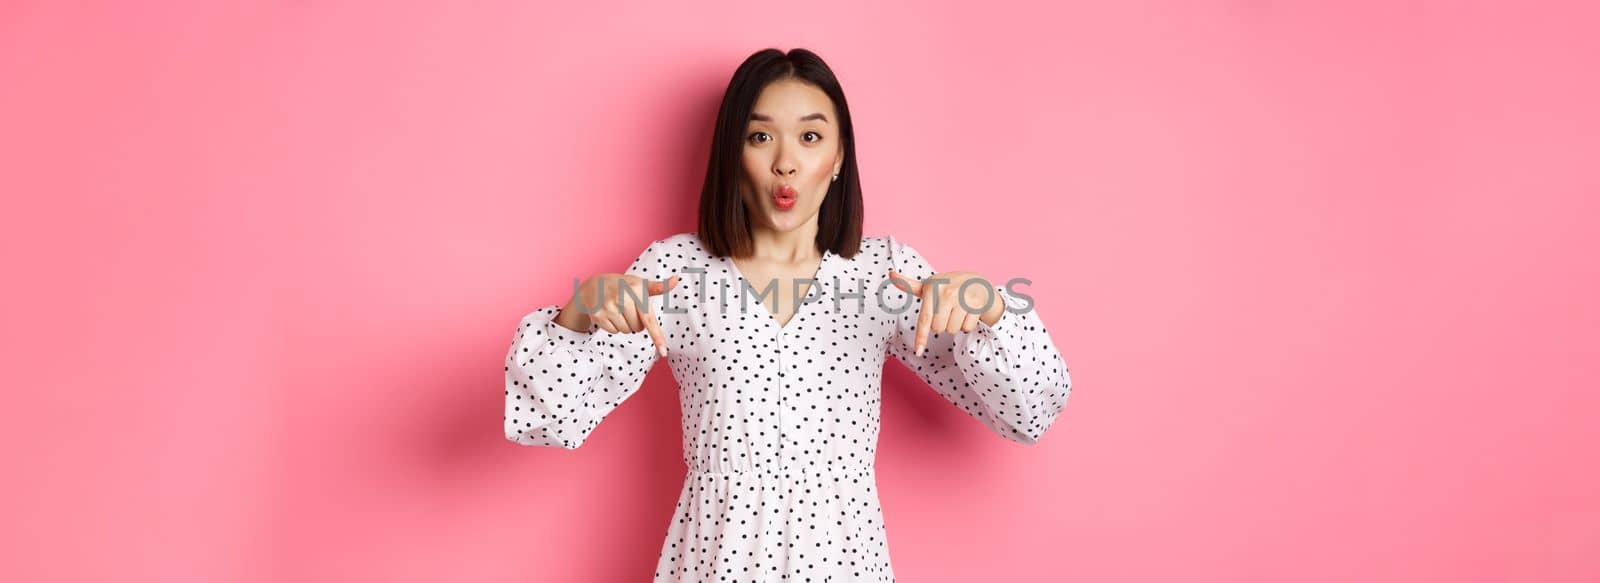 Impressed asian woman in dress pointing fingers down, look there gesture, check out discounts and sales, standing amazed over pink background.